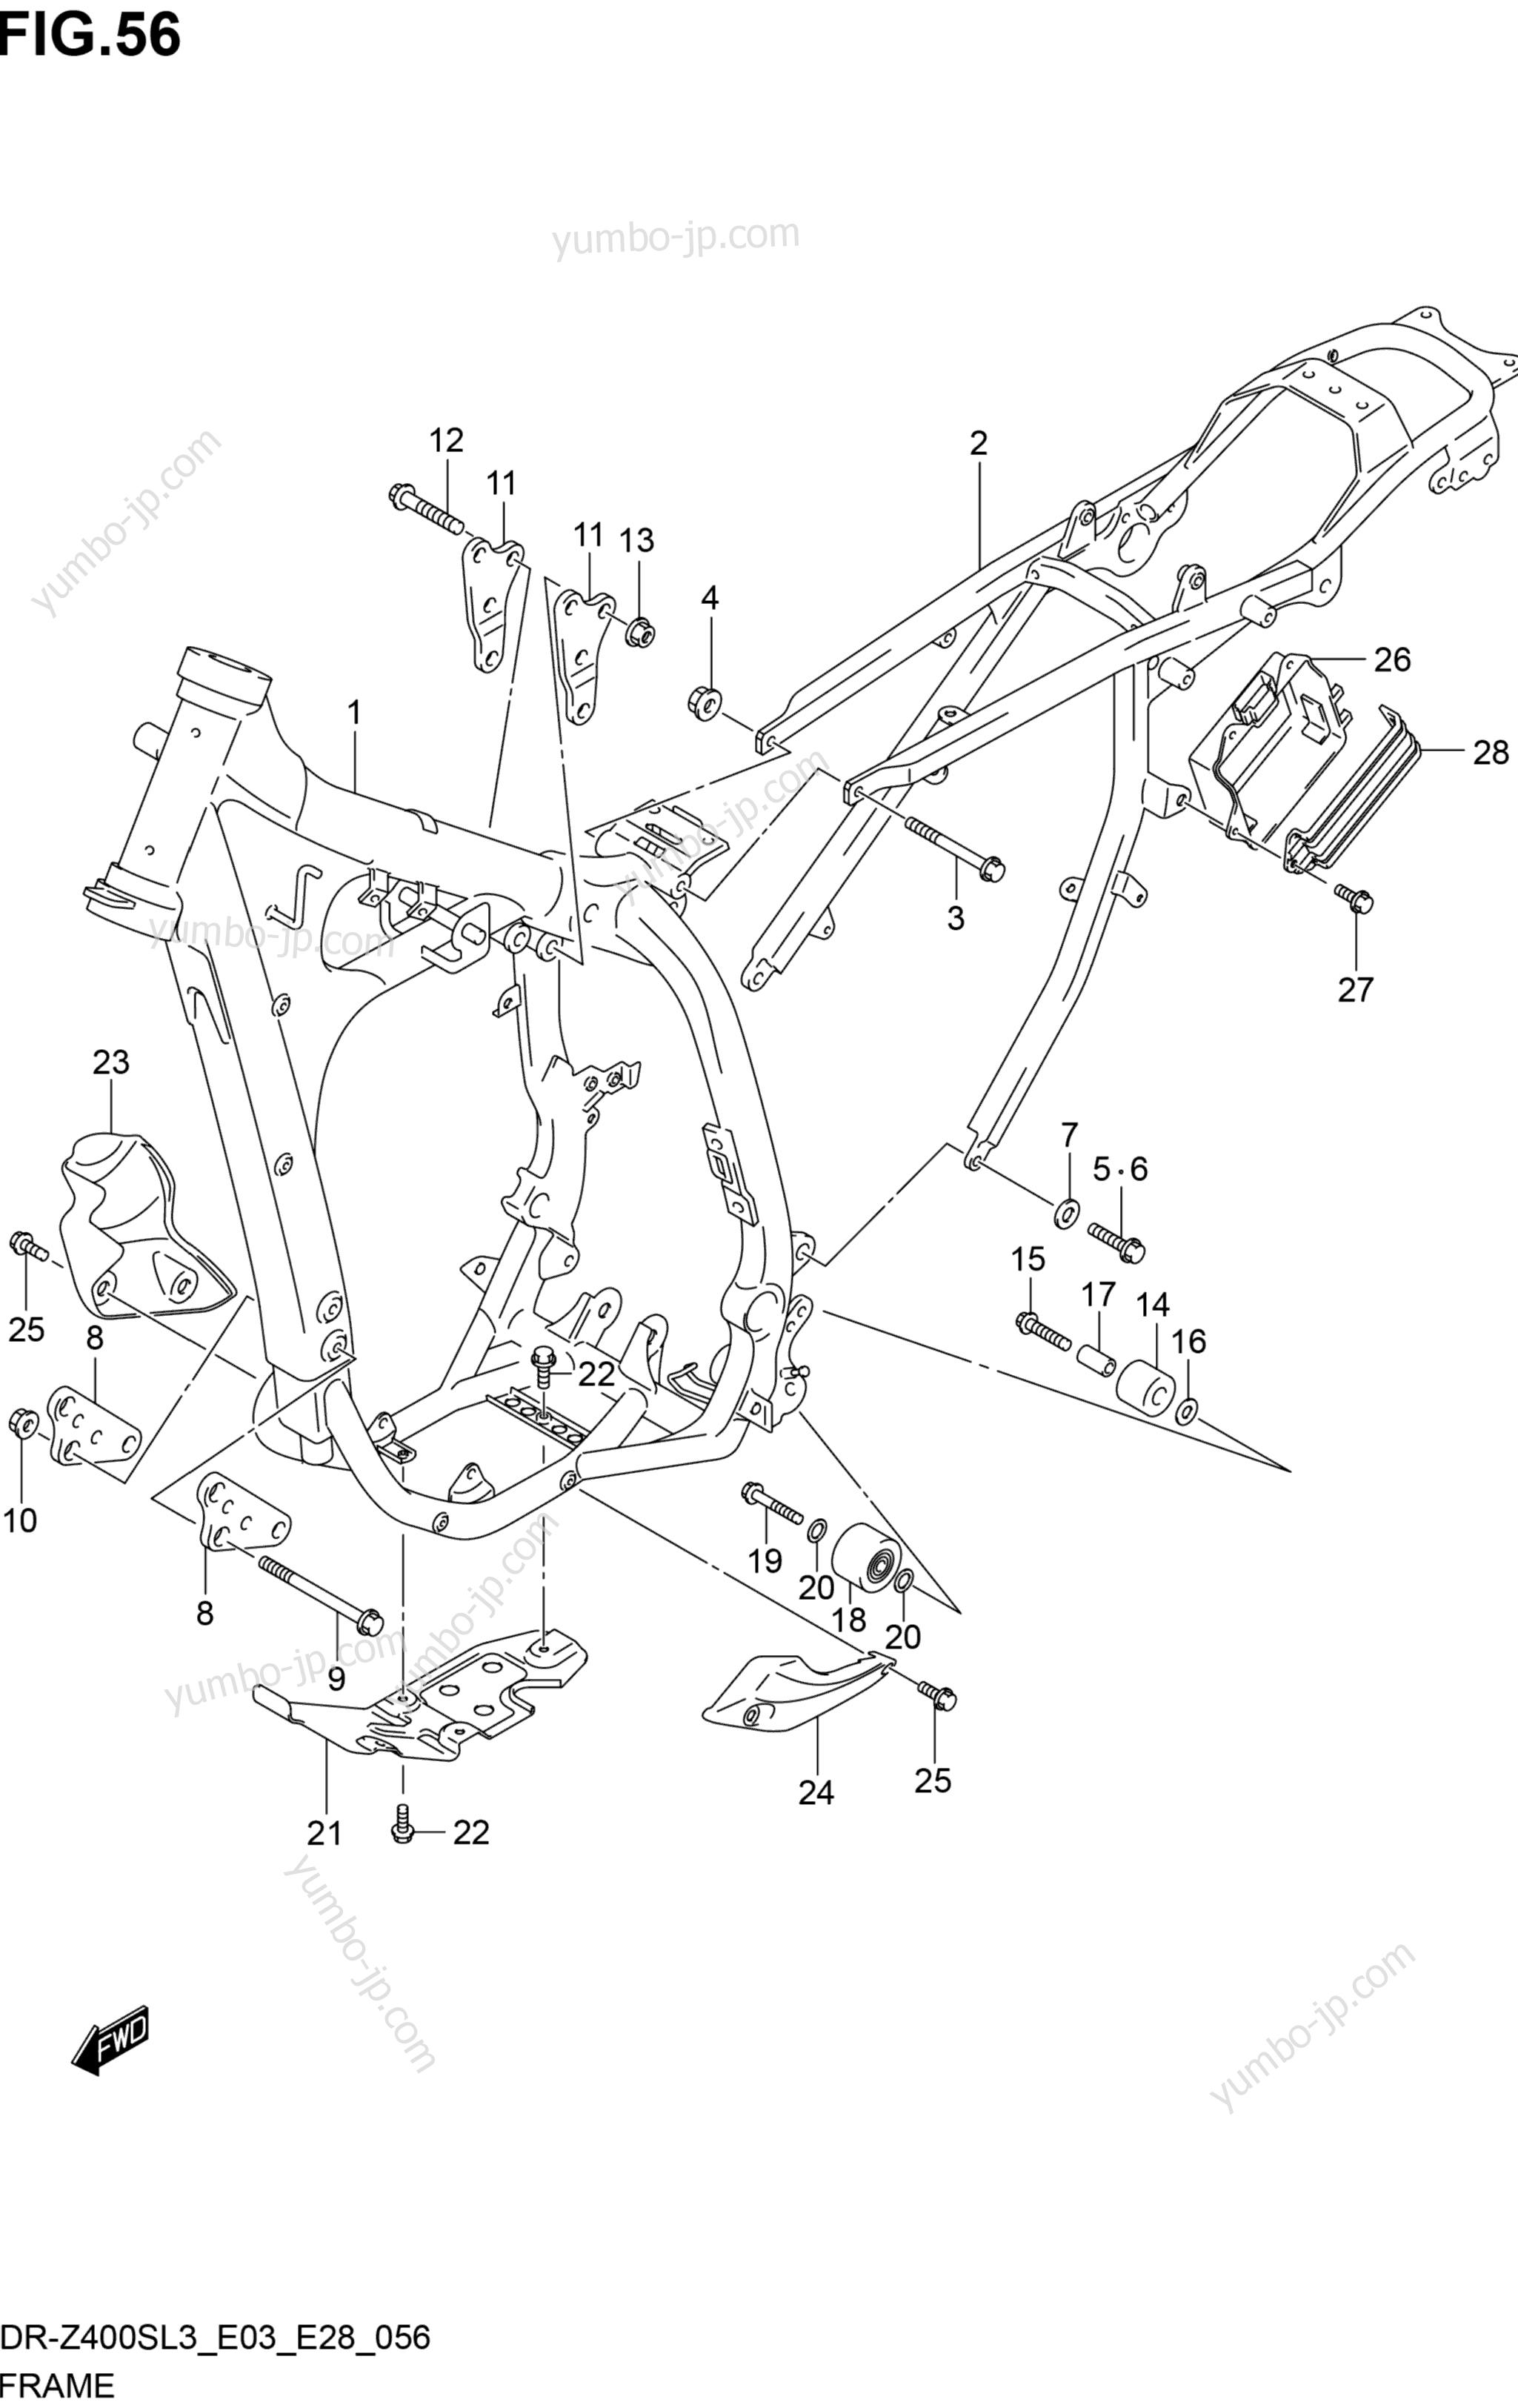 FRAME (DR-Z400SL3 E28) for motorcycles SUZUKI DR-Z400S 2013 year